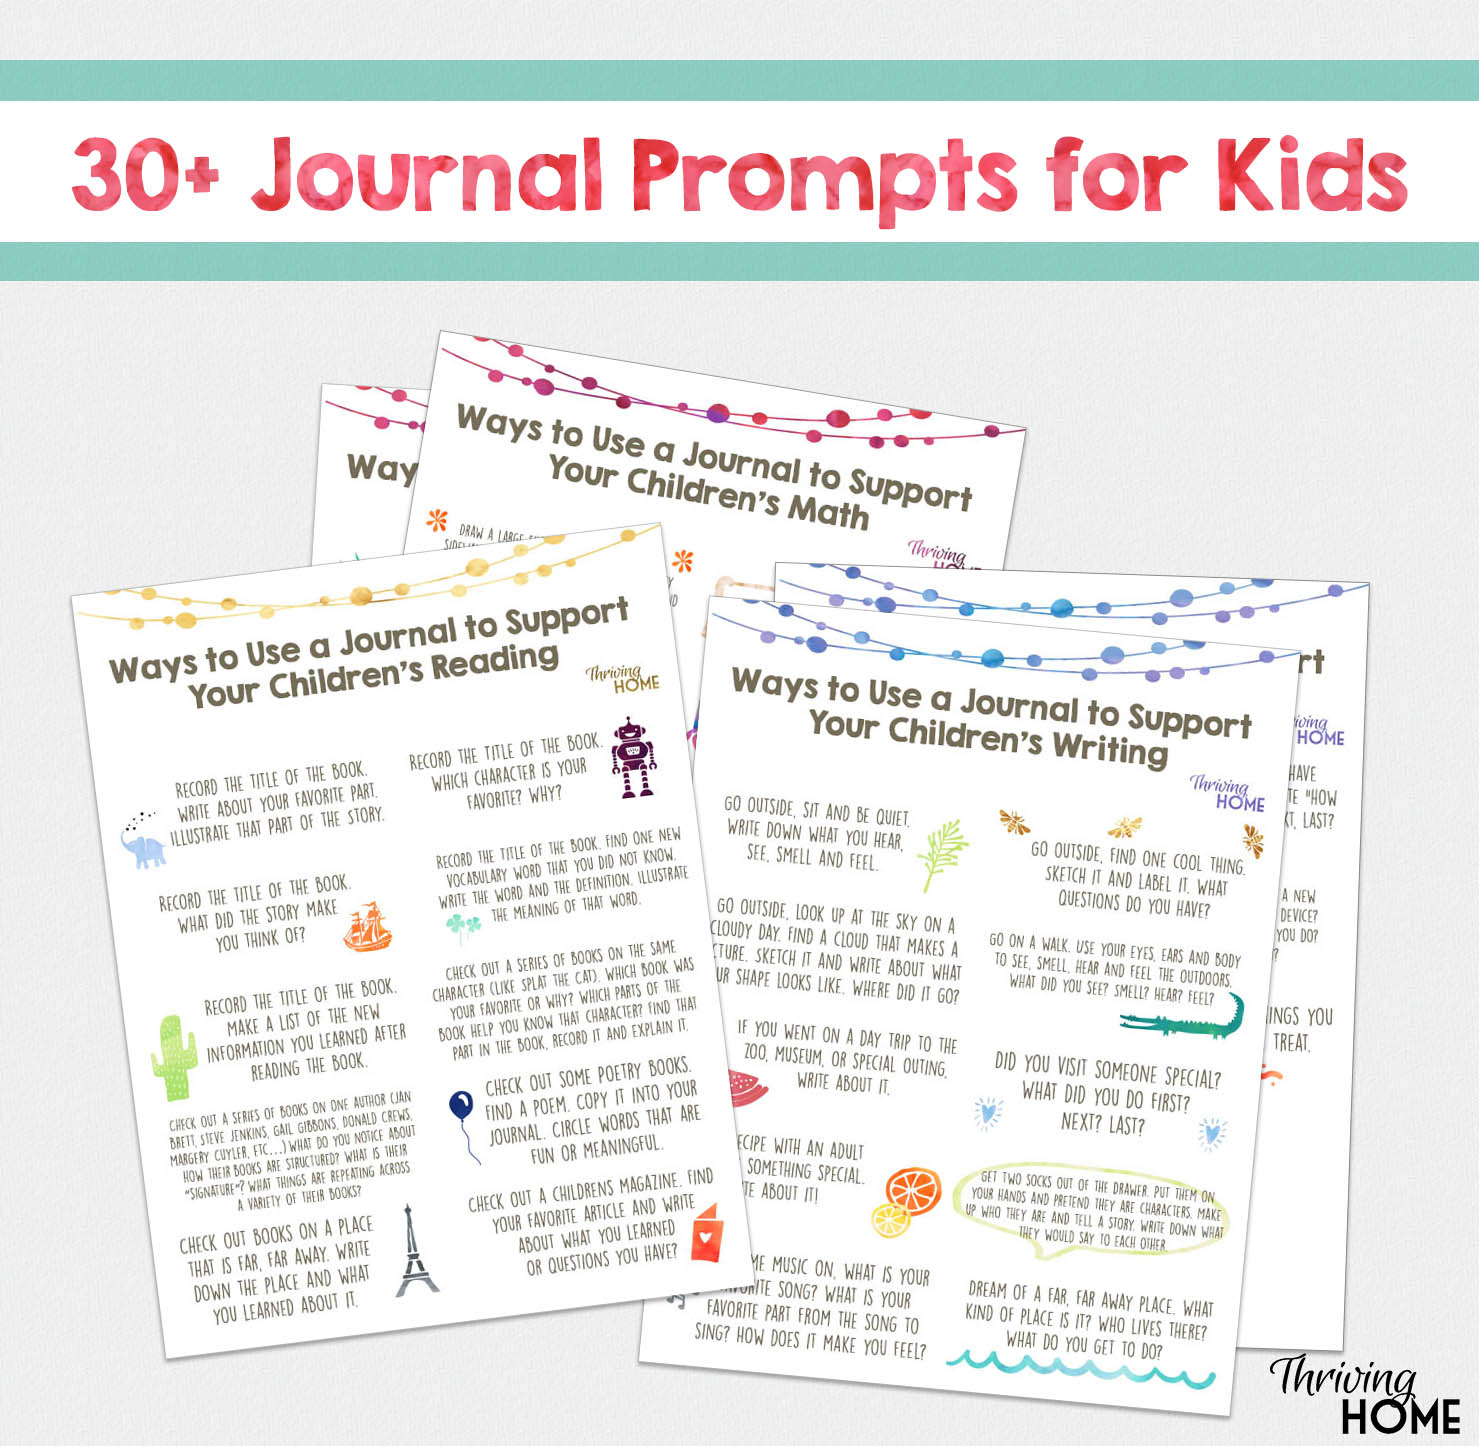 30+ Journal Prompts for Kids (FREE PRINTABLE)